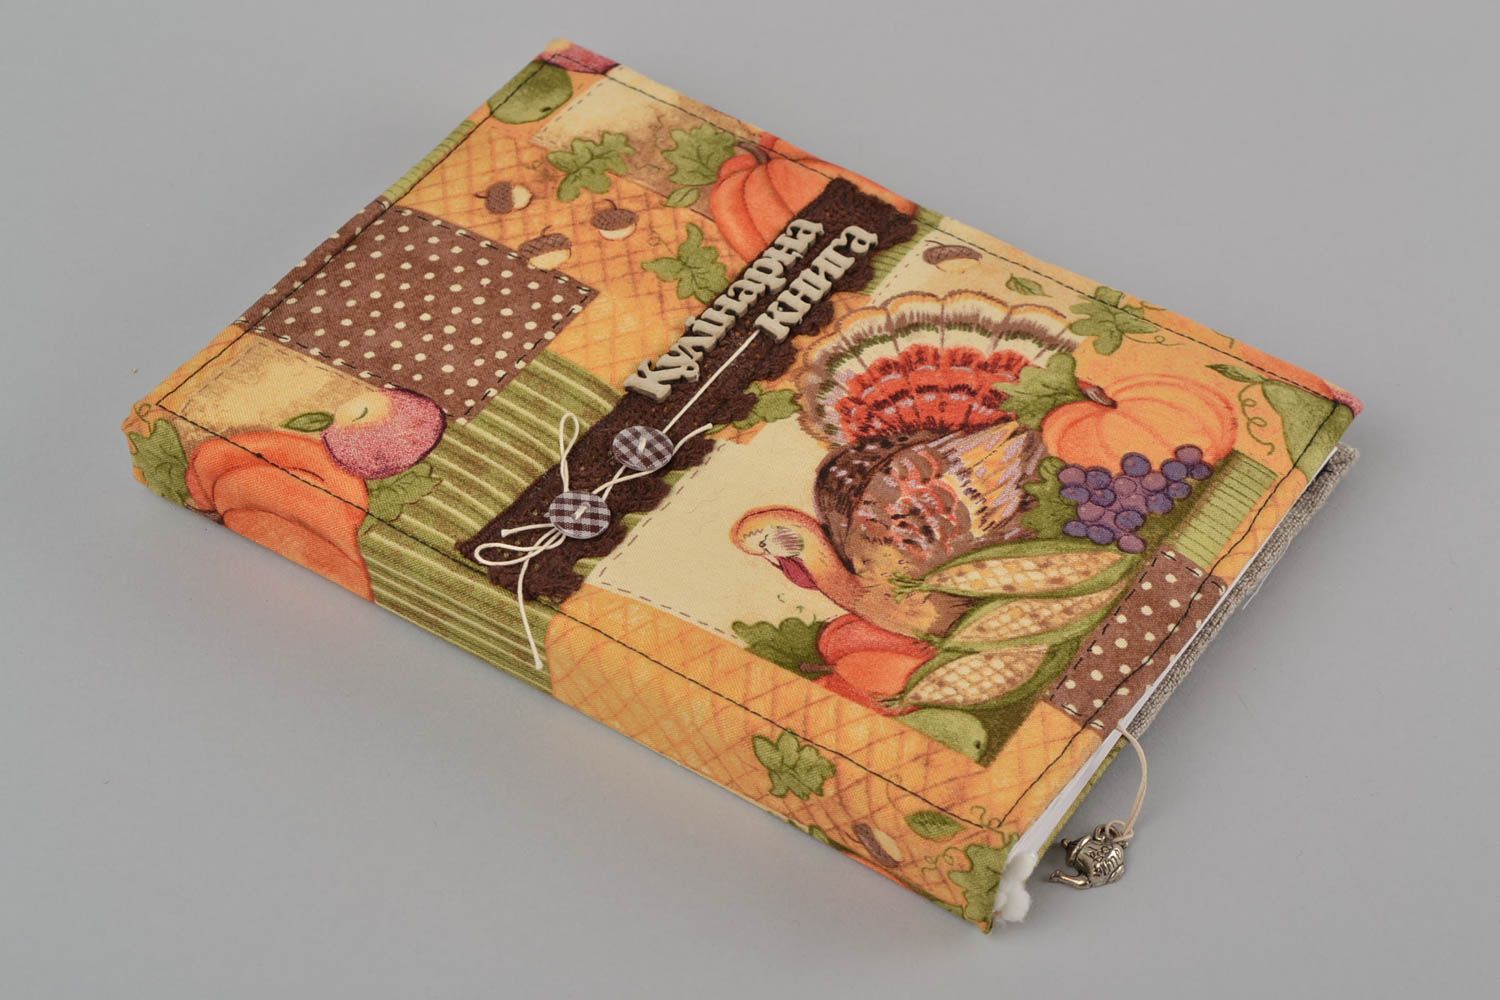 Handmade scrapbooking culinary book with colorful cotton fabric cover photo 3